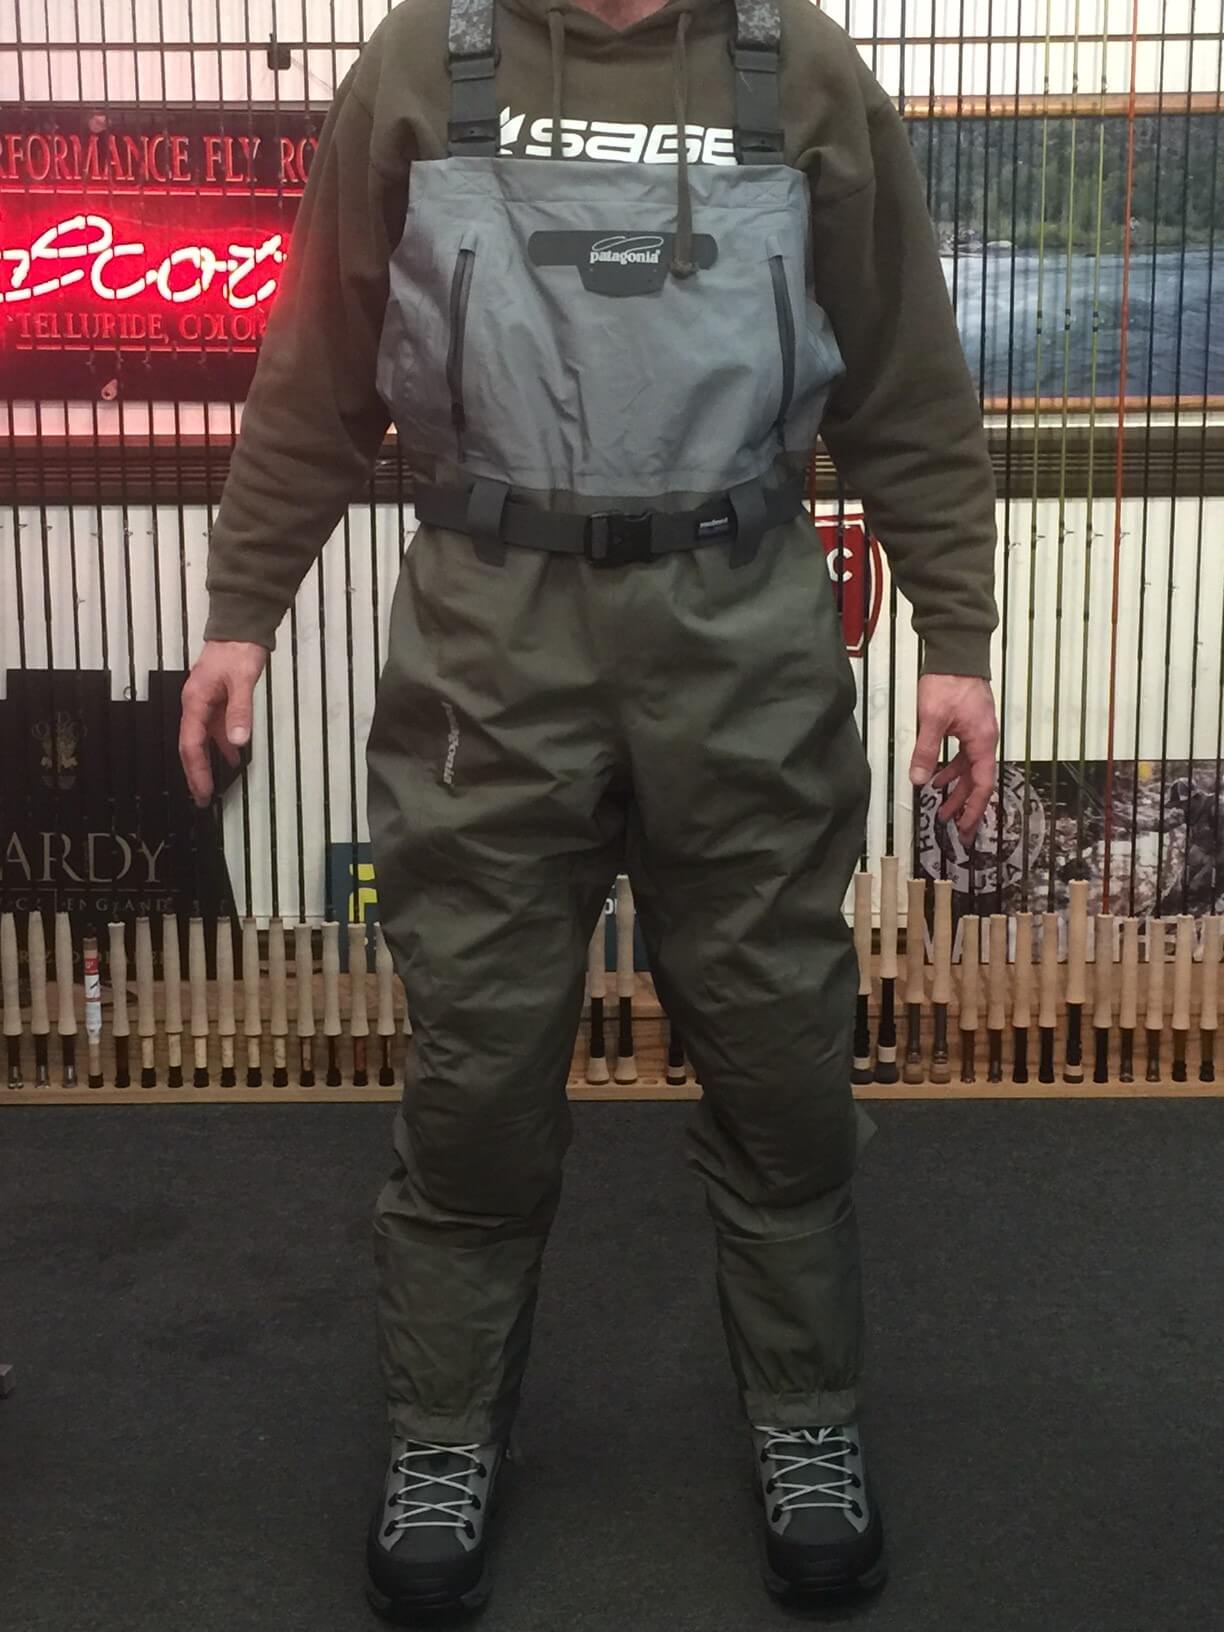 bruge dele Vej Patagonia Rio Gallegos Waders, Version 2016, detailed product review -  Telluride Angler